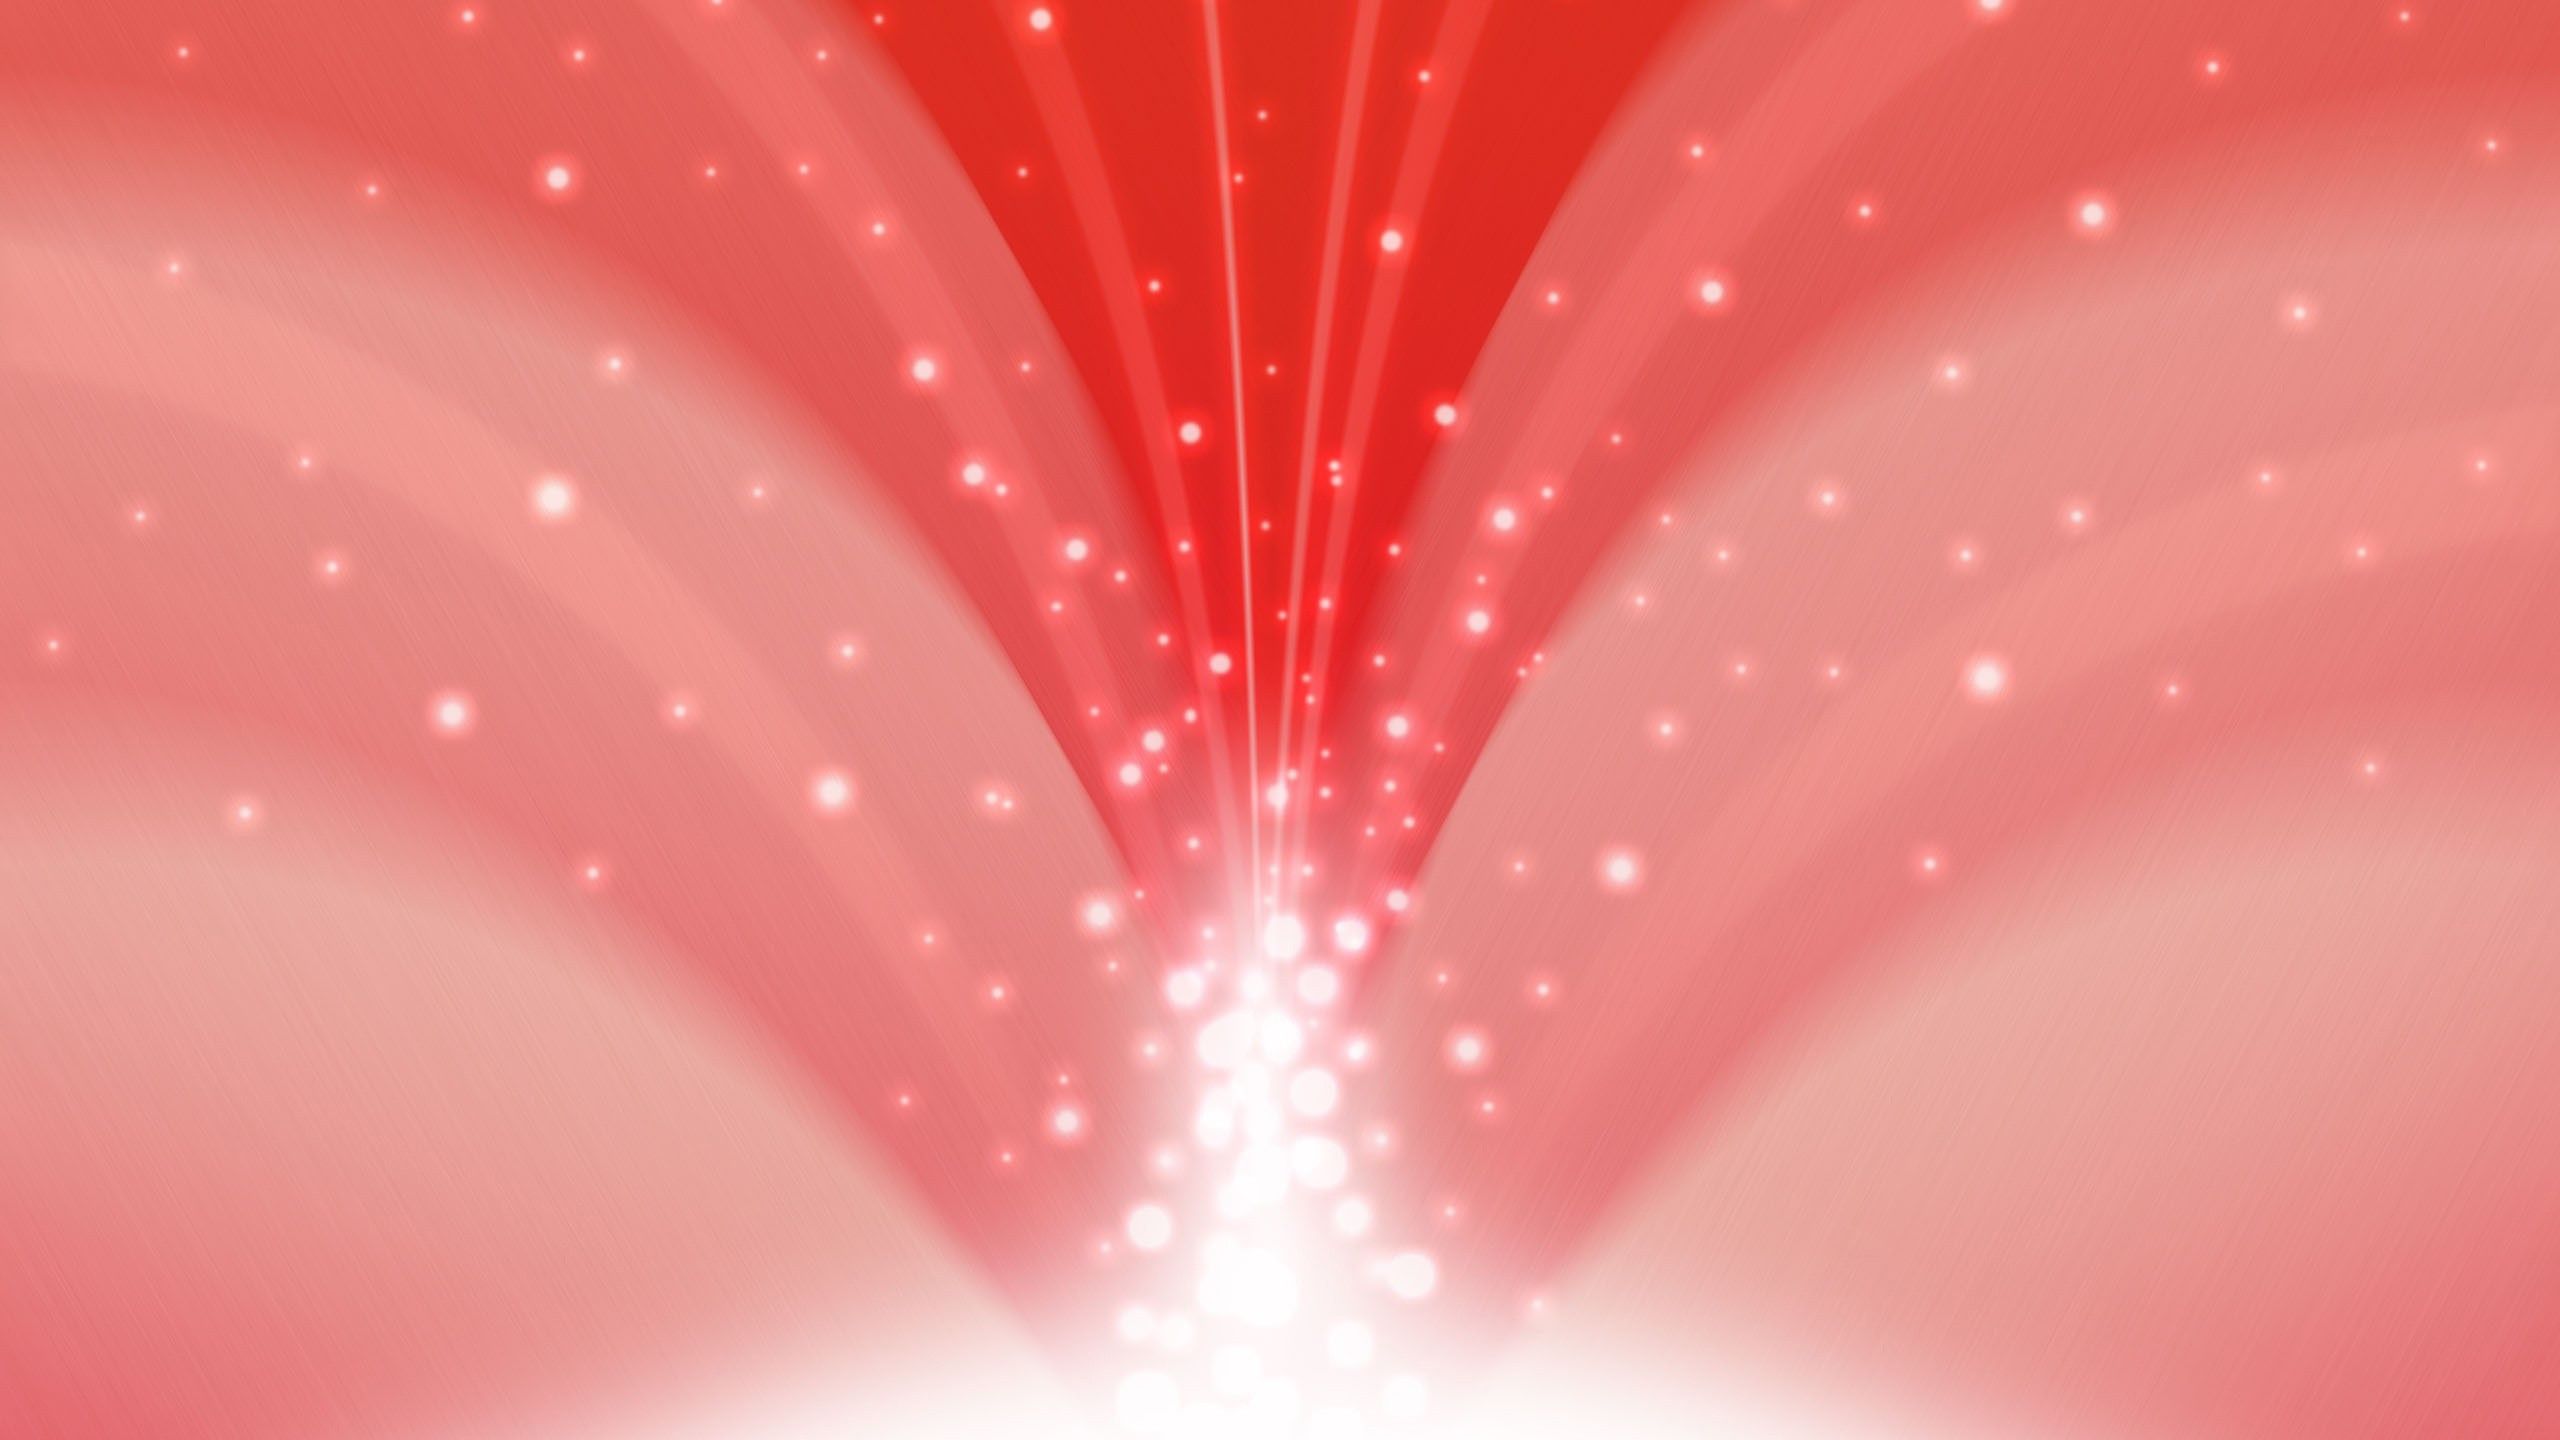 Light Red With Shimmering Effect HD Red Aesthetic Wallpaper